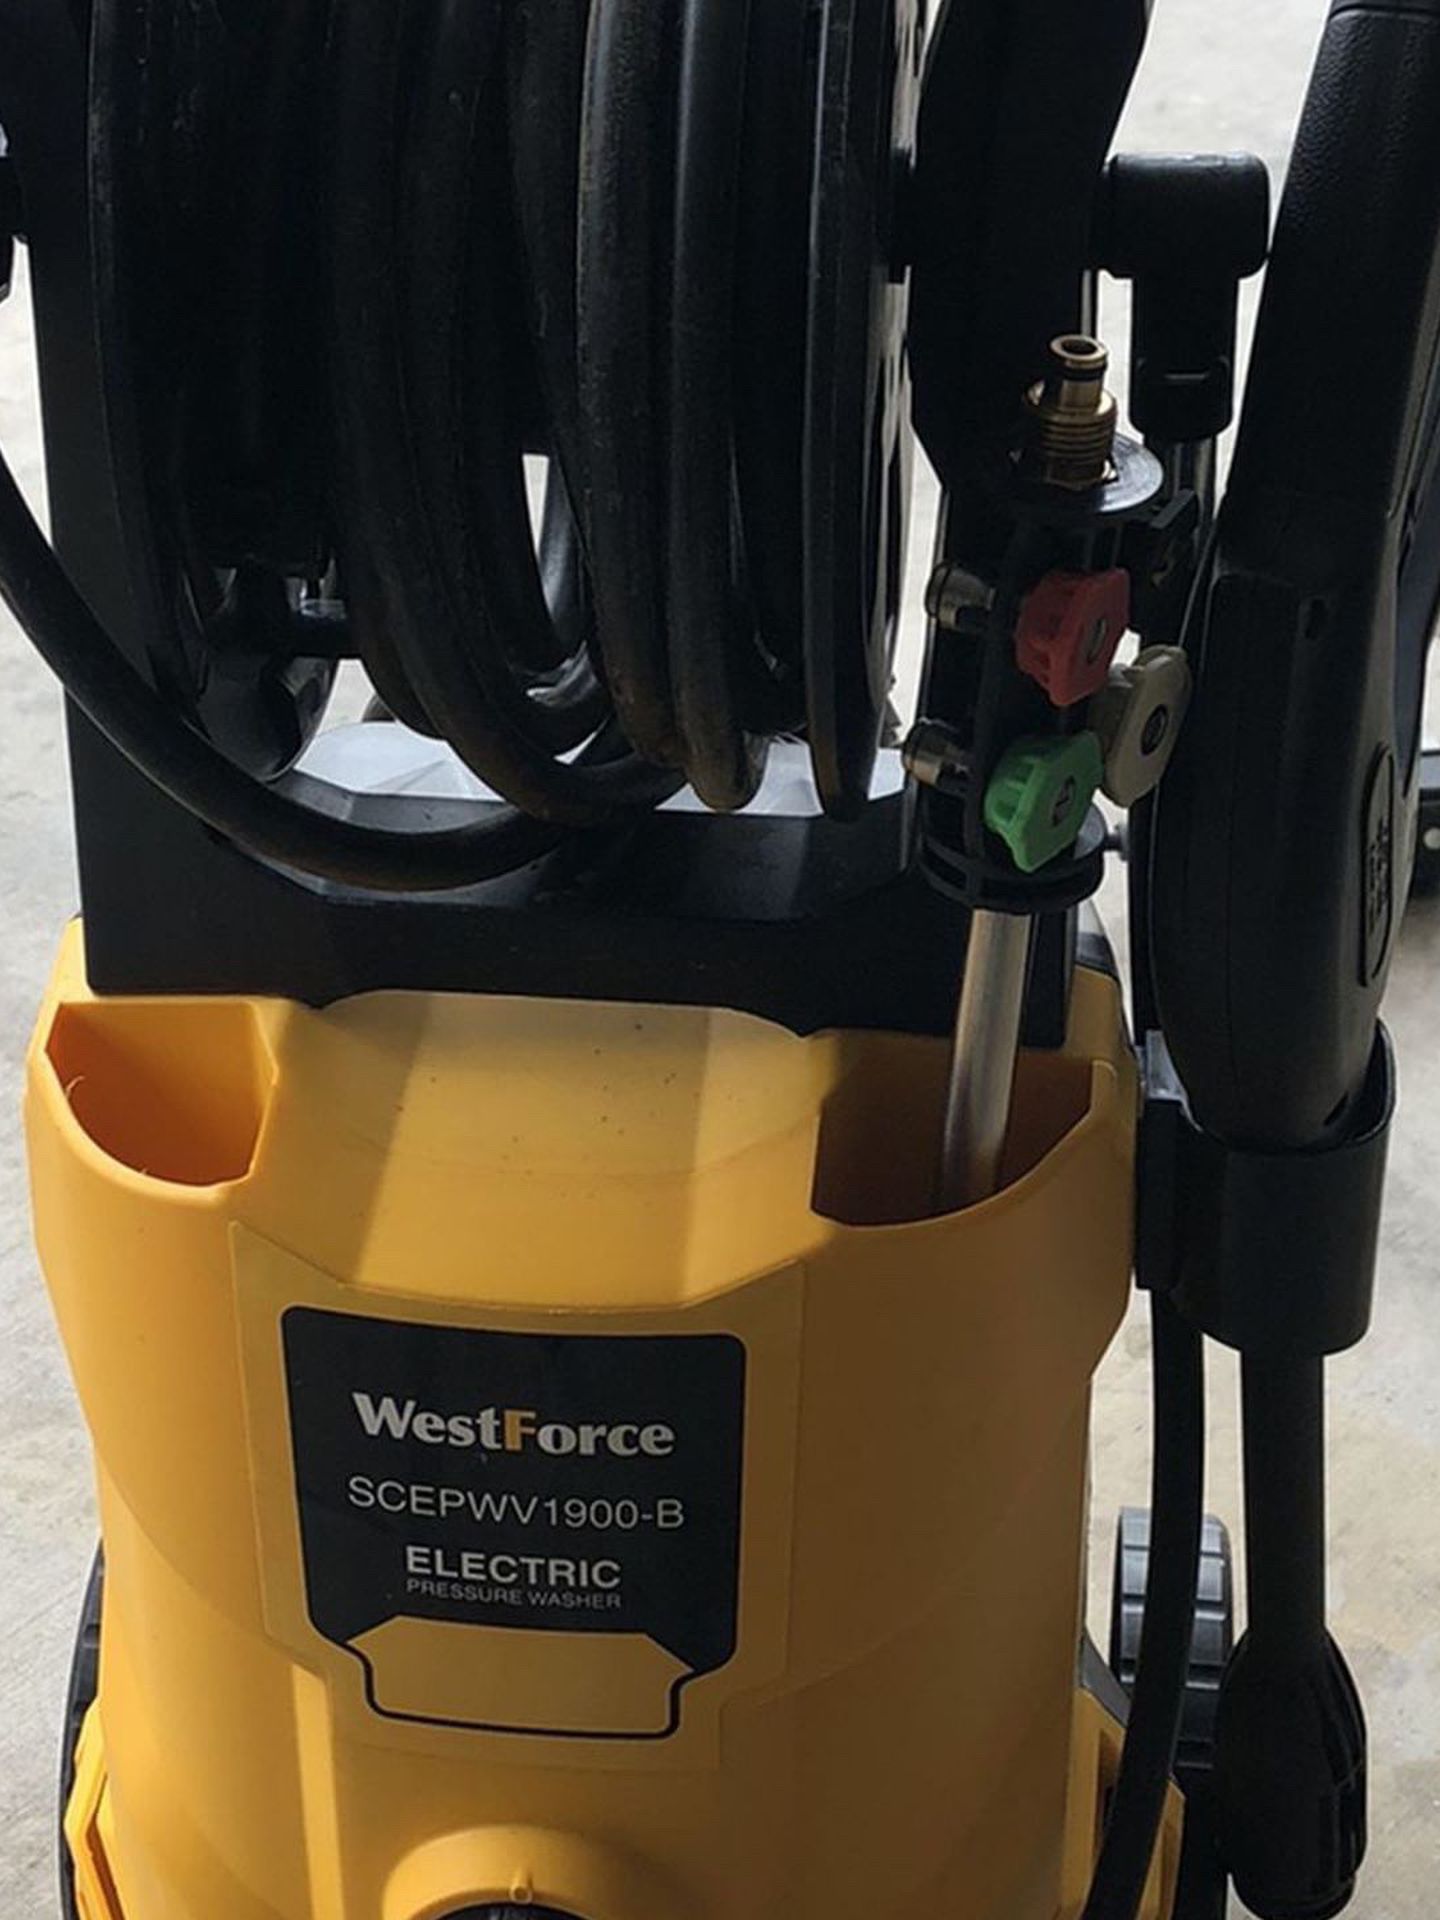 Broken - West force Electric Power Washer. Parts